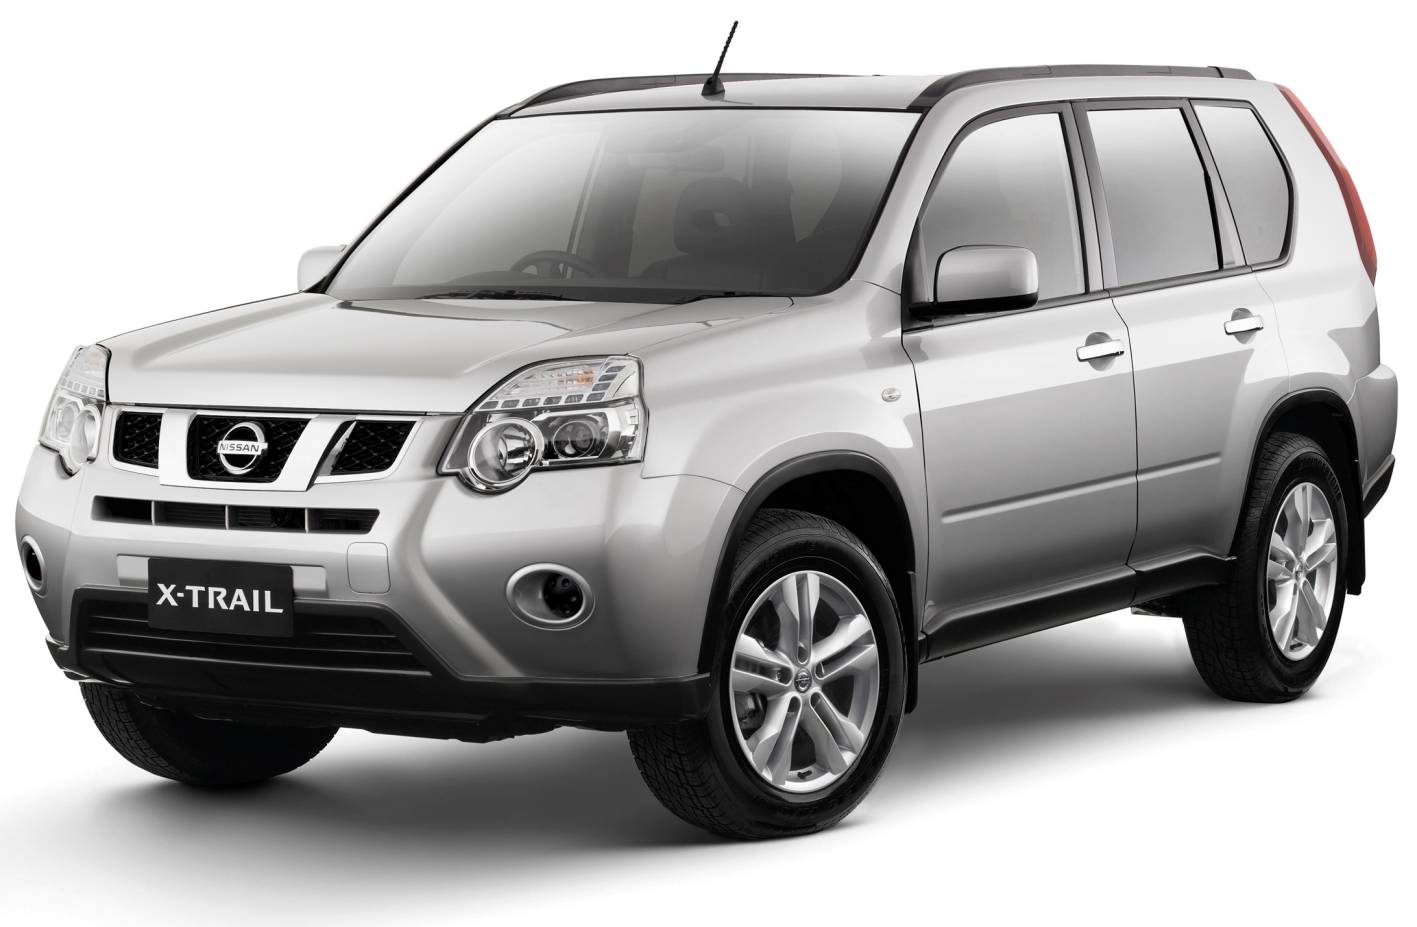 2011 Nissan X-Trail ST 2WD And ST-L 2WD On Sale In Australia | Reviews